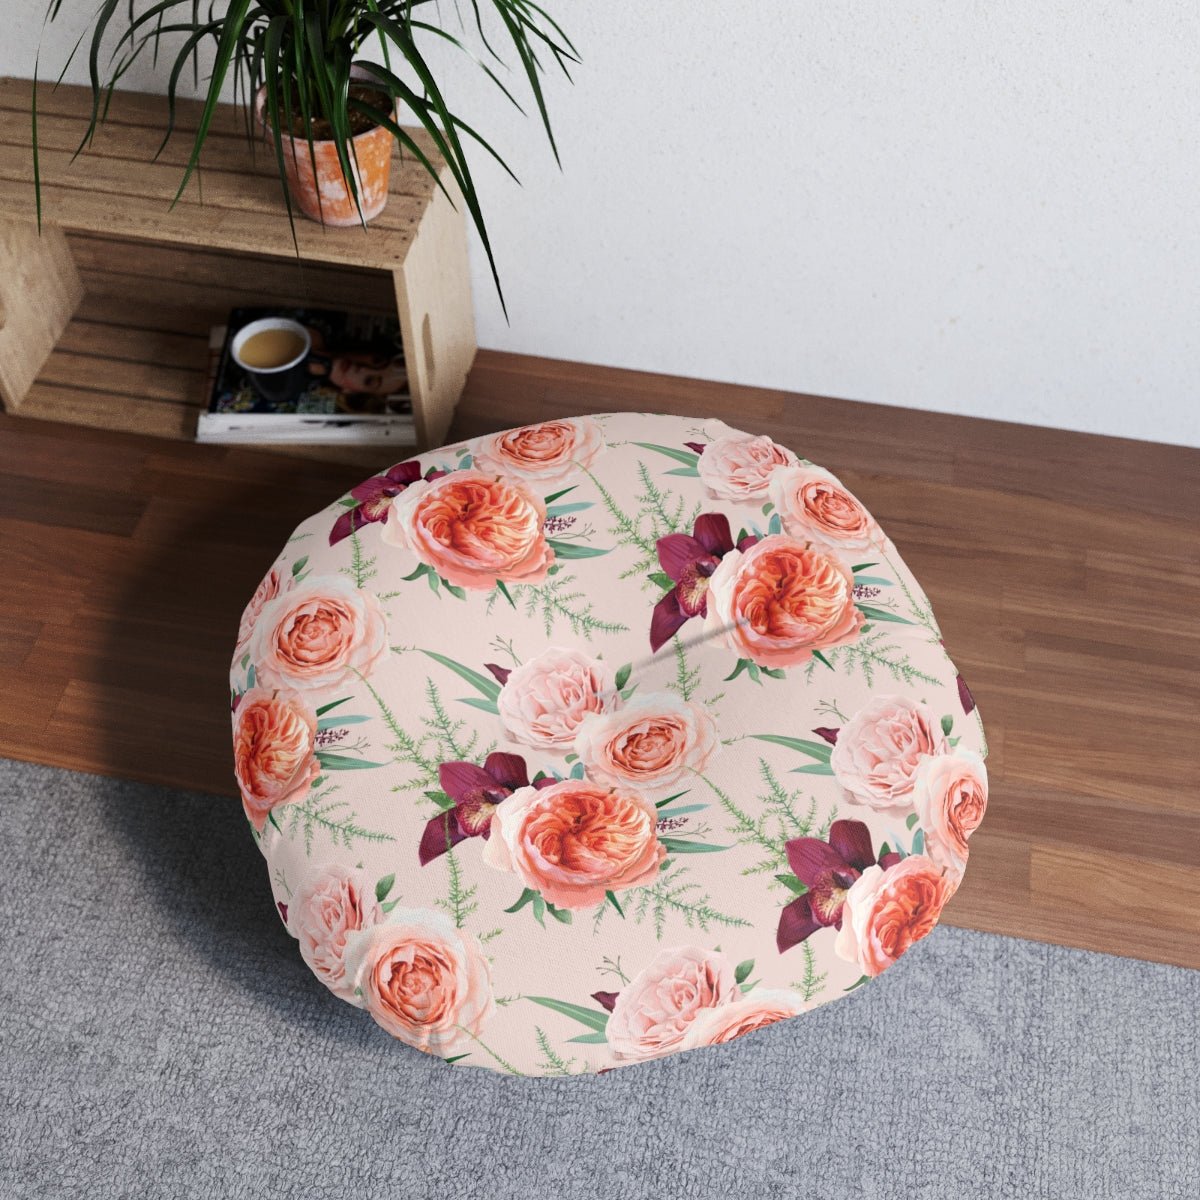 Blush Roses Round Tufted Floor Pillow - Puffin Lime